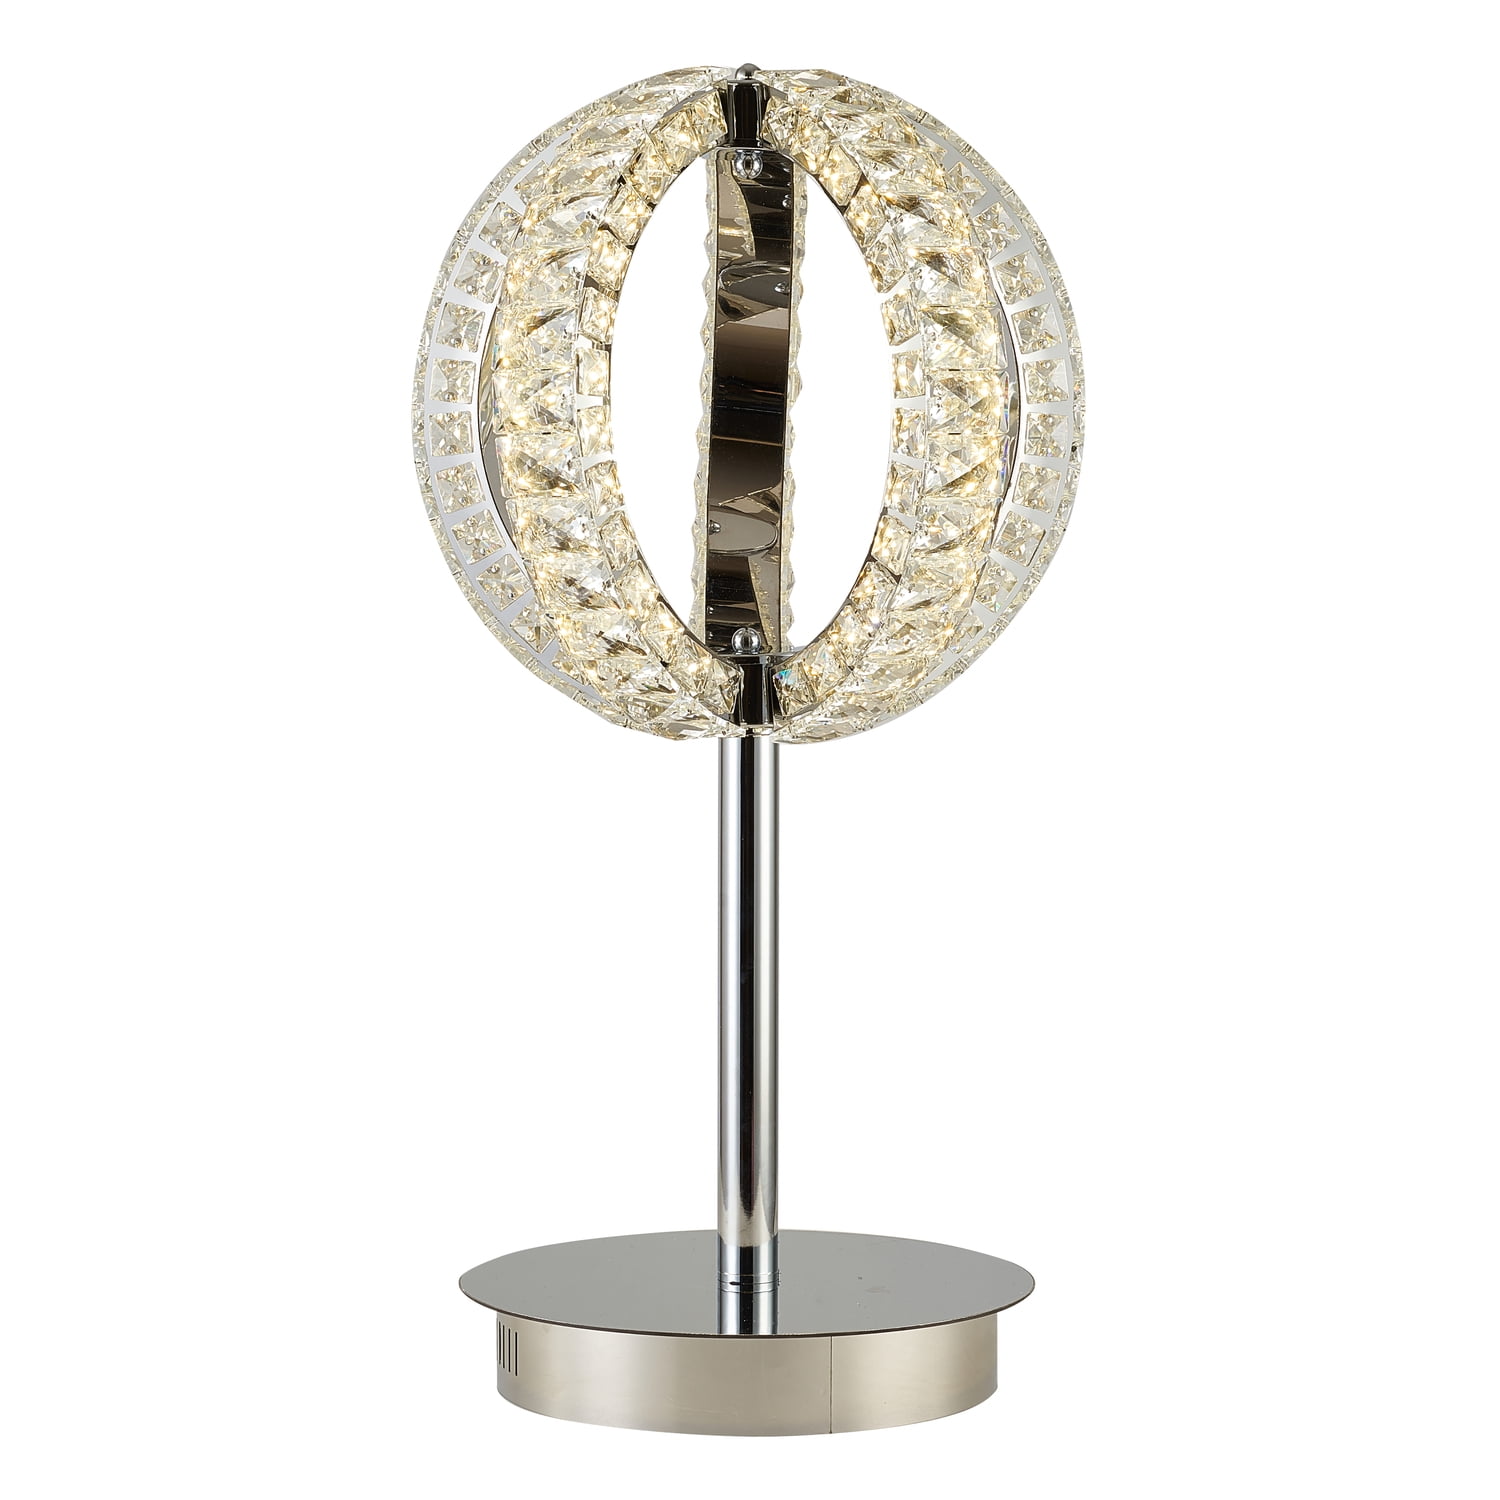 LAMP FINIAL-ORB CRYSTAL LAMP FINIAL WITH POL CHROME BASE 